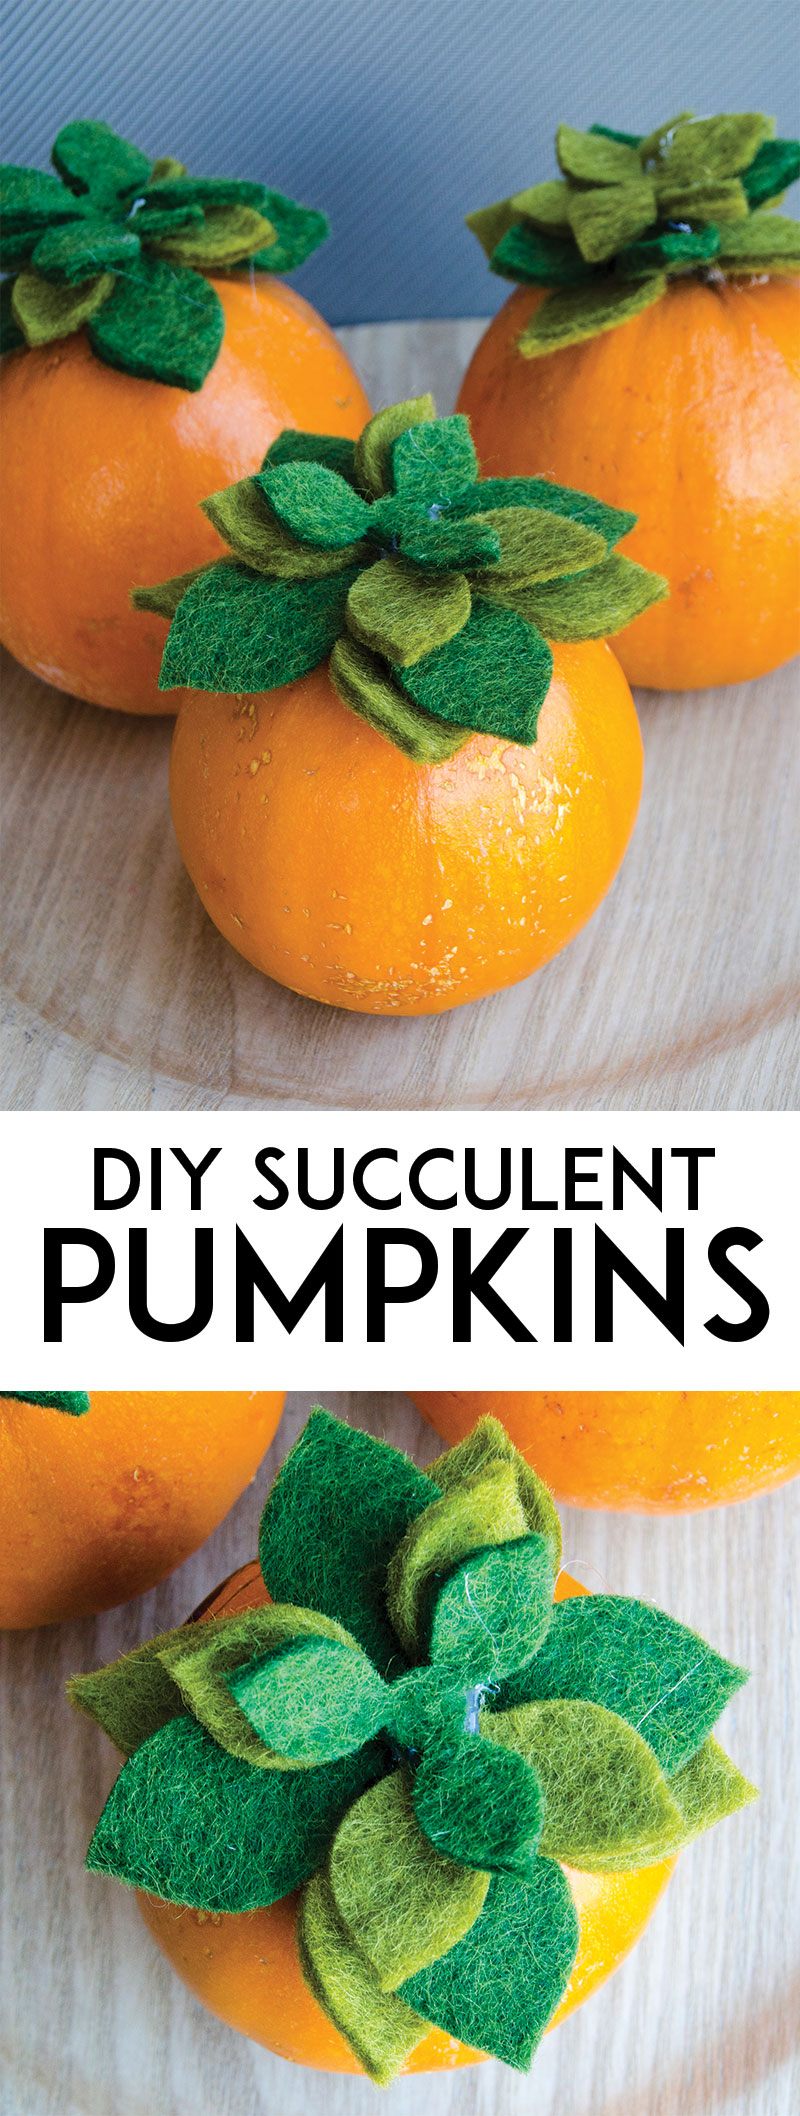 DIY Succulent Pumpkins by Lindi Haws of Love The Day